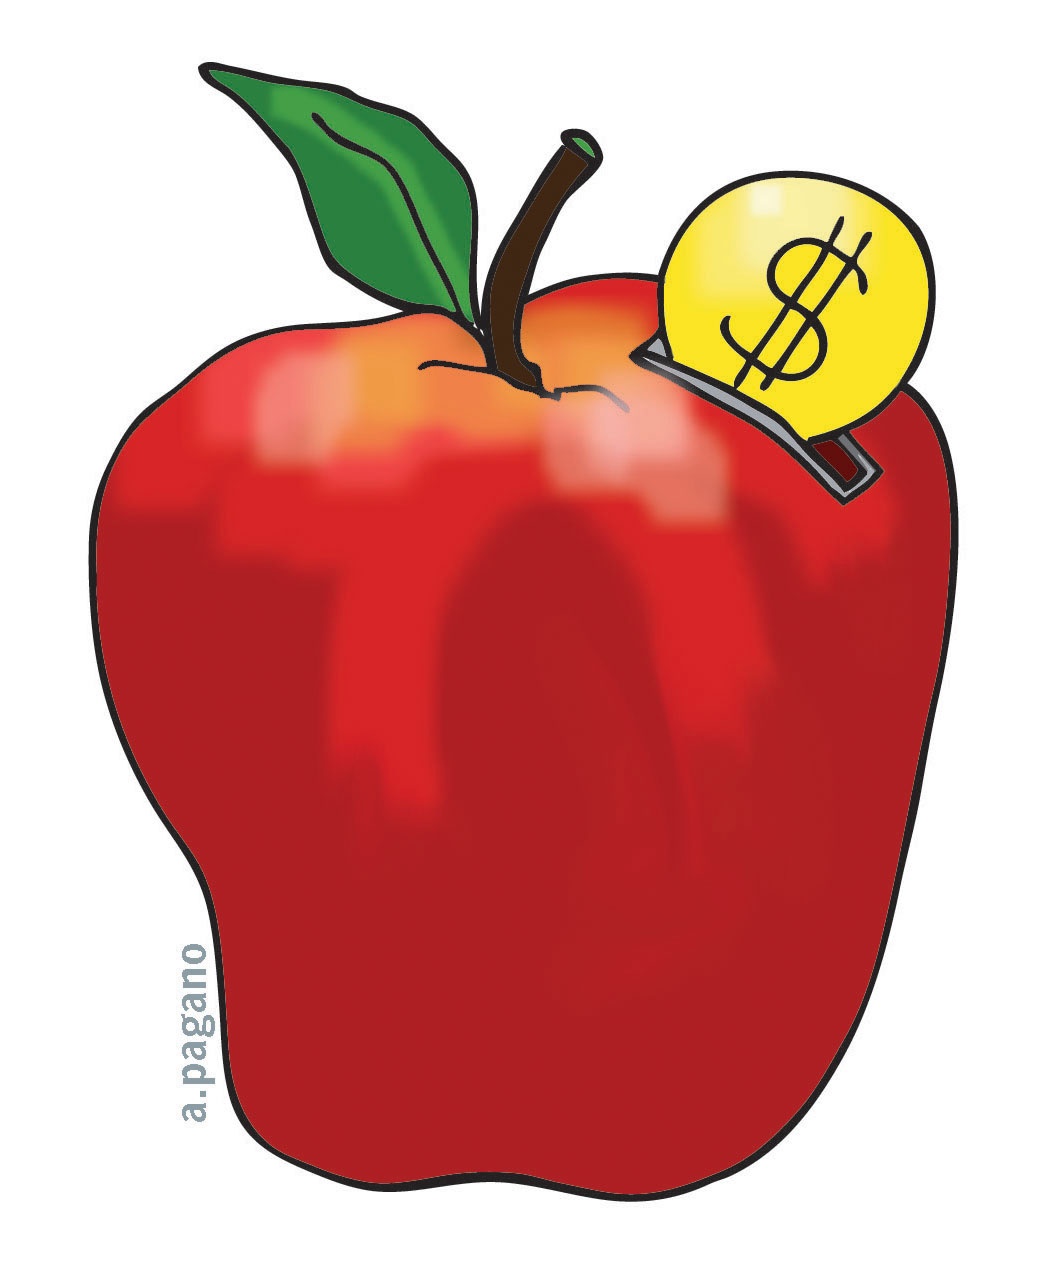 Fundraising Clip Art - Free Clipart Images